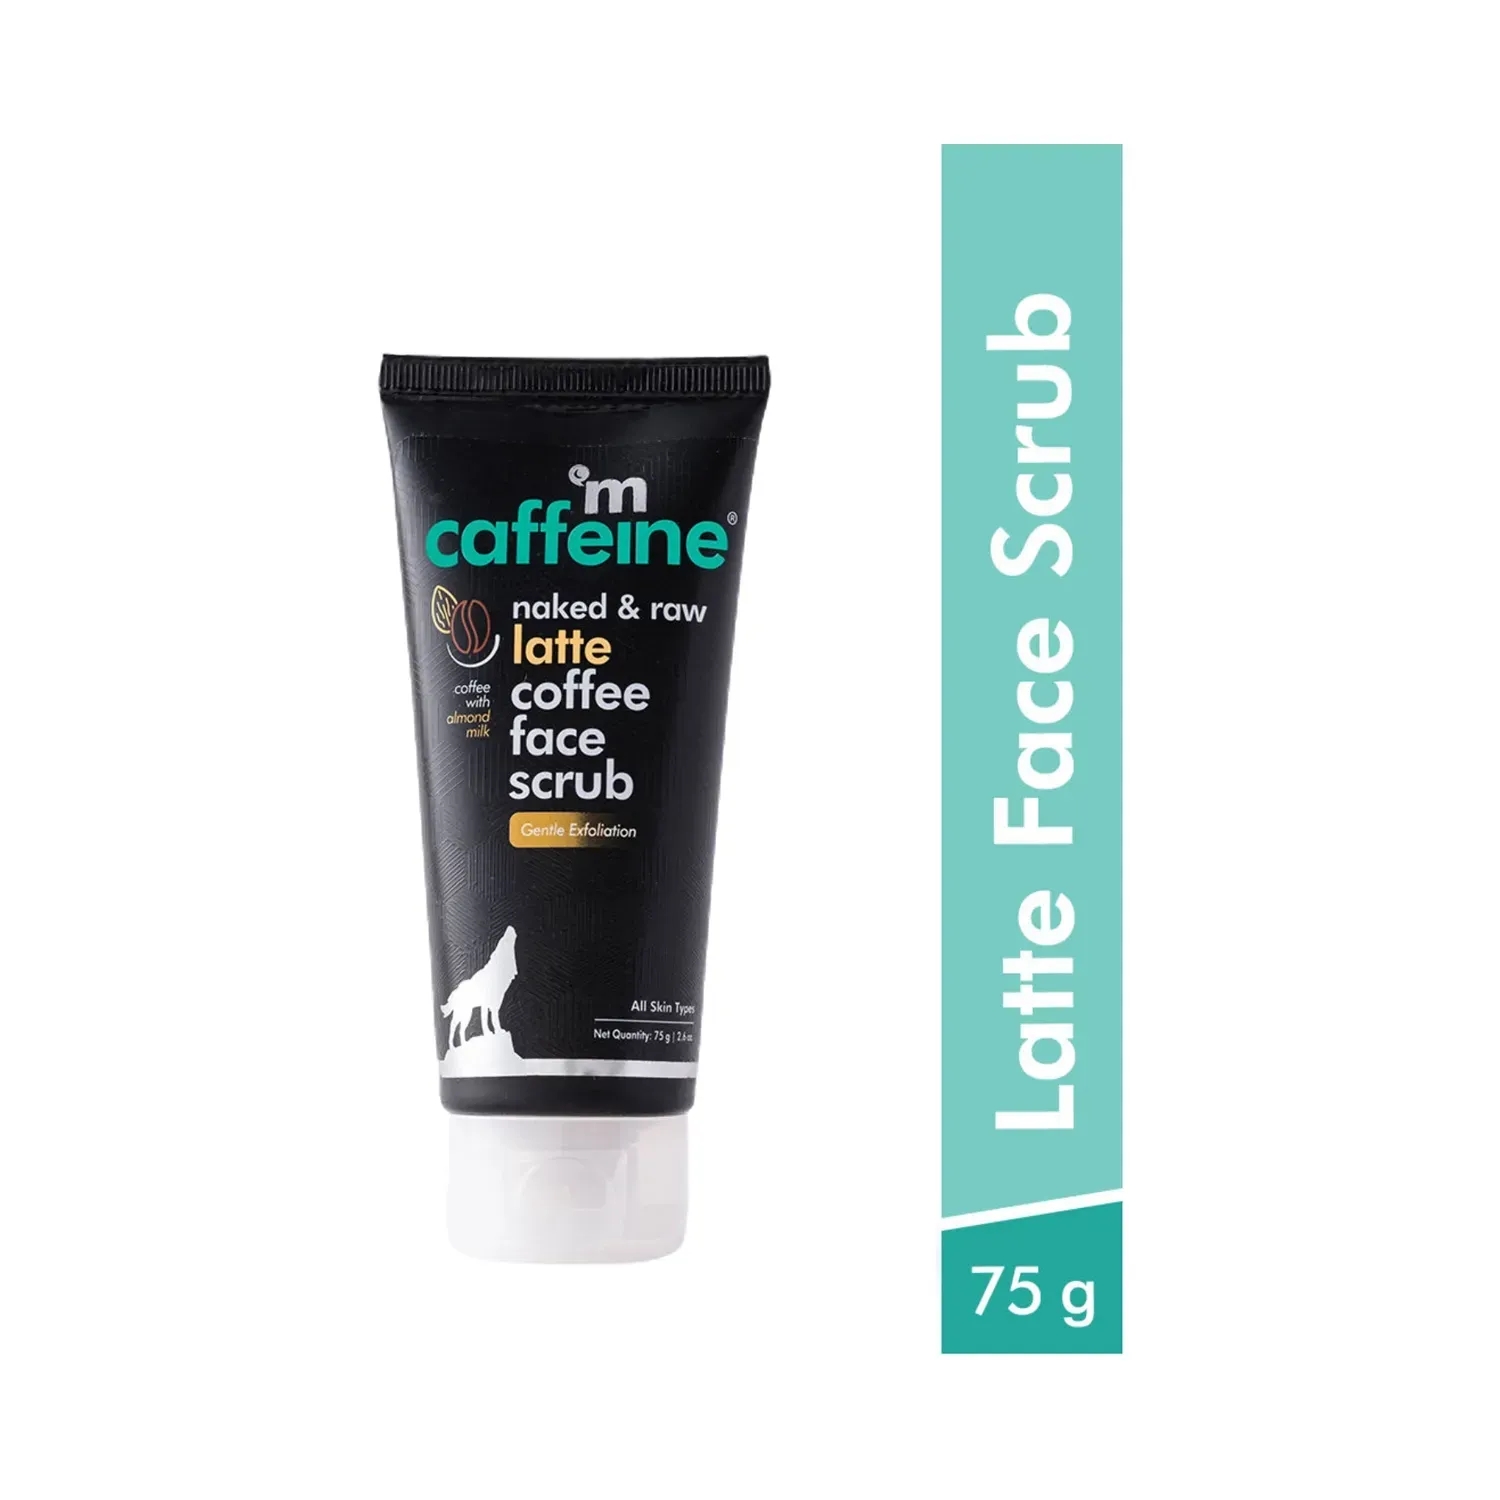 mCaffeine Naked & Raw Latte Coffee Gentle Exfoliating Face Scrub for Moisture Retention with Shea Butter - (75g)